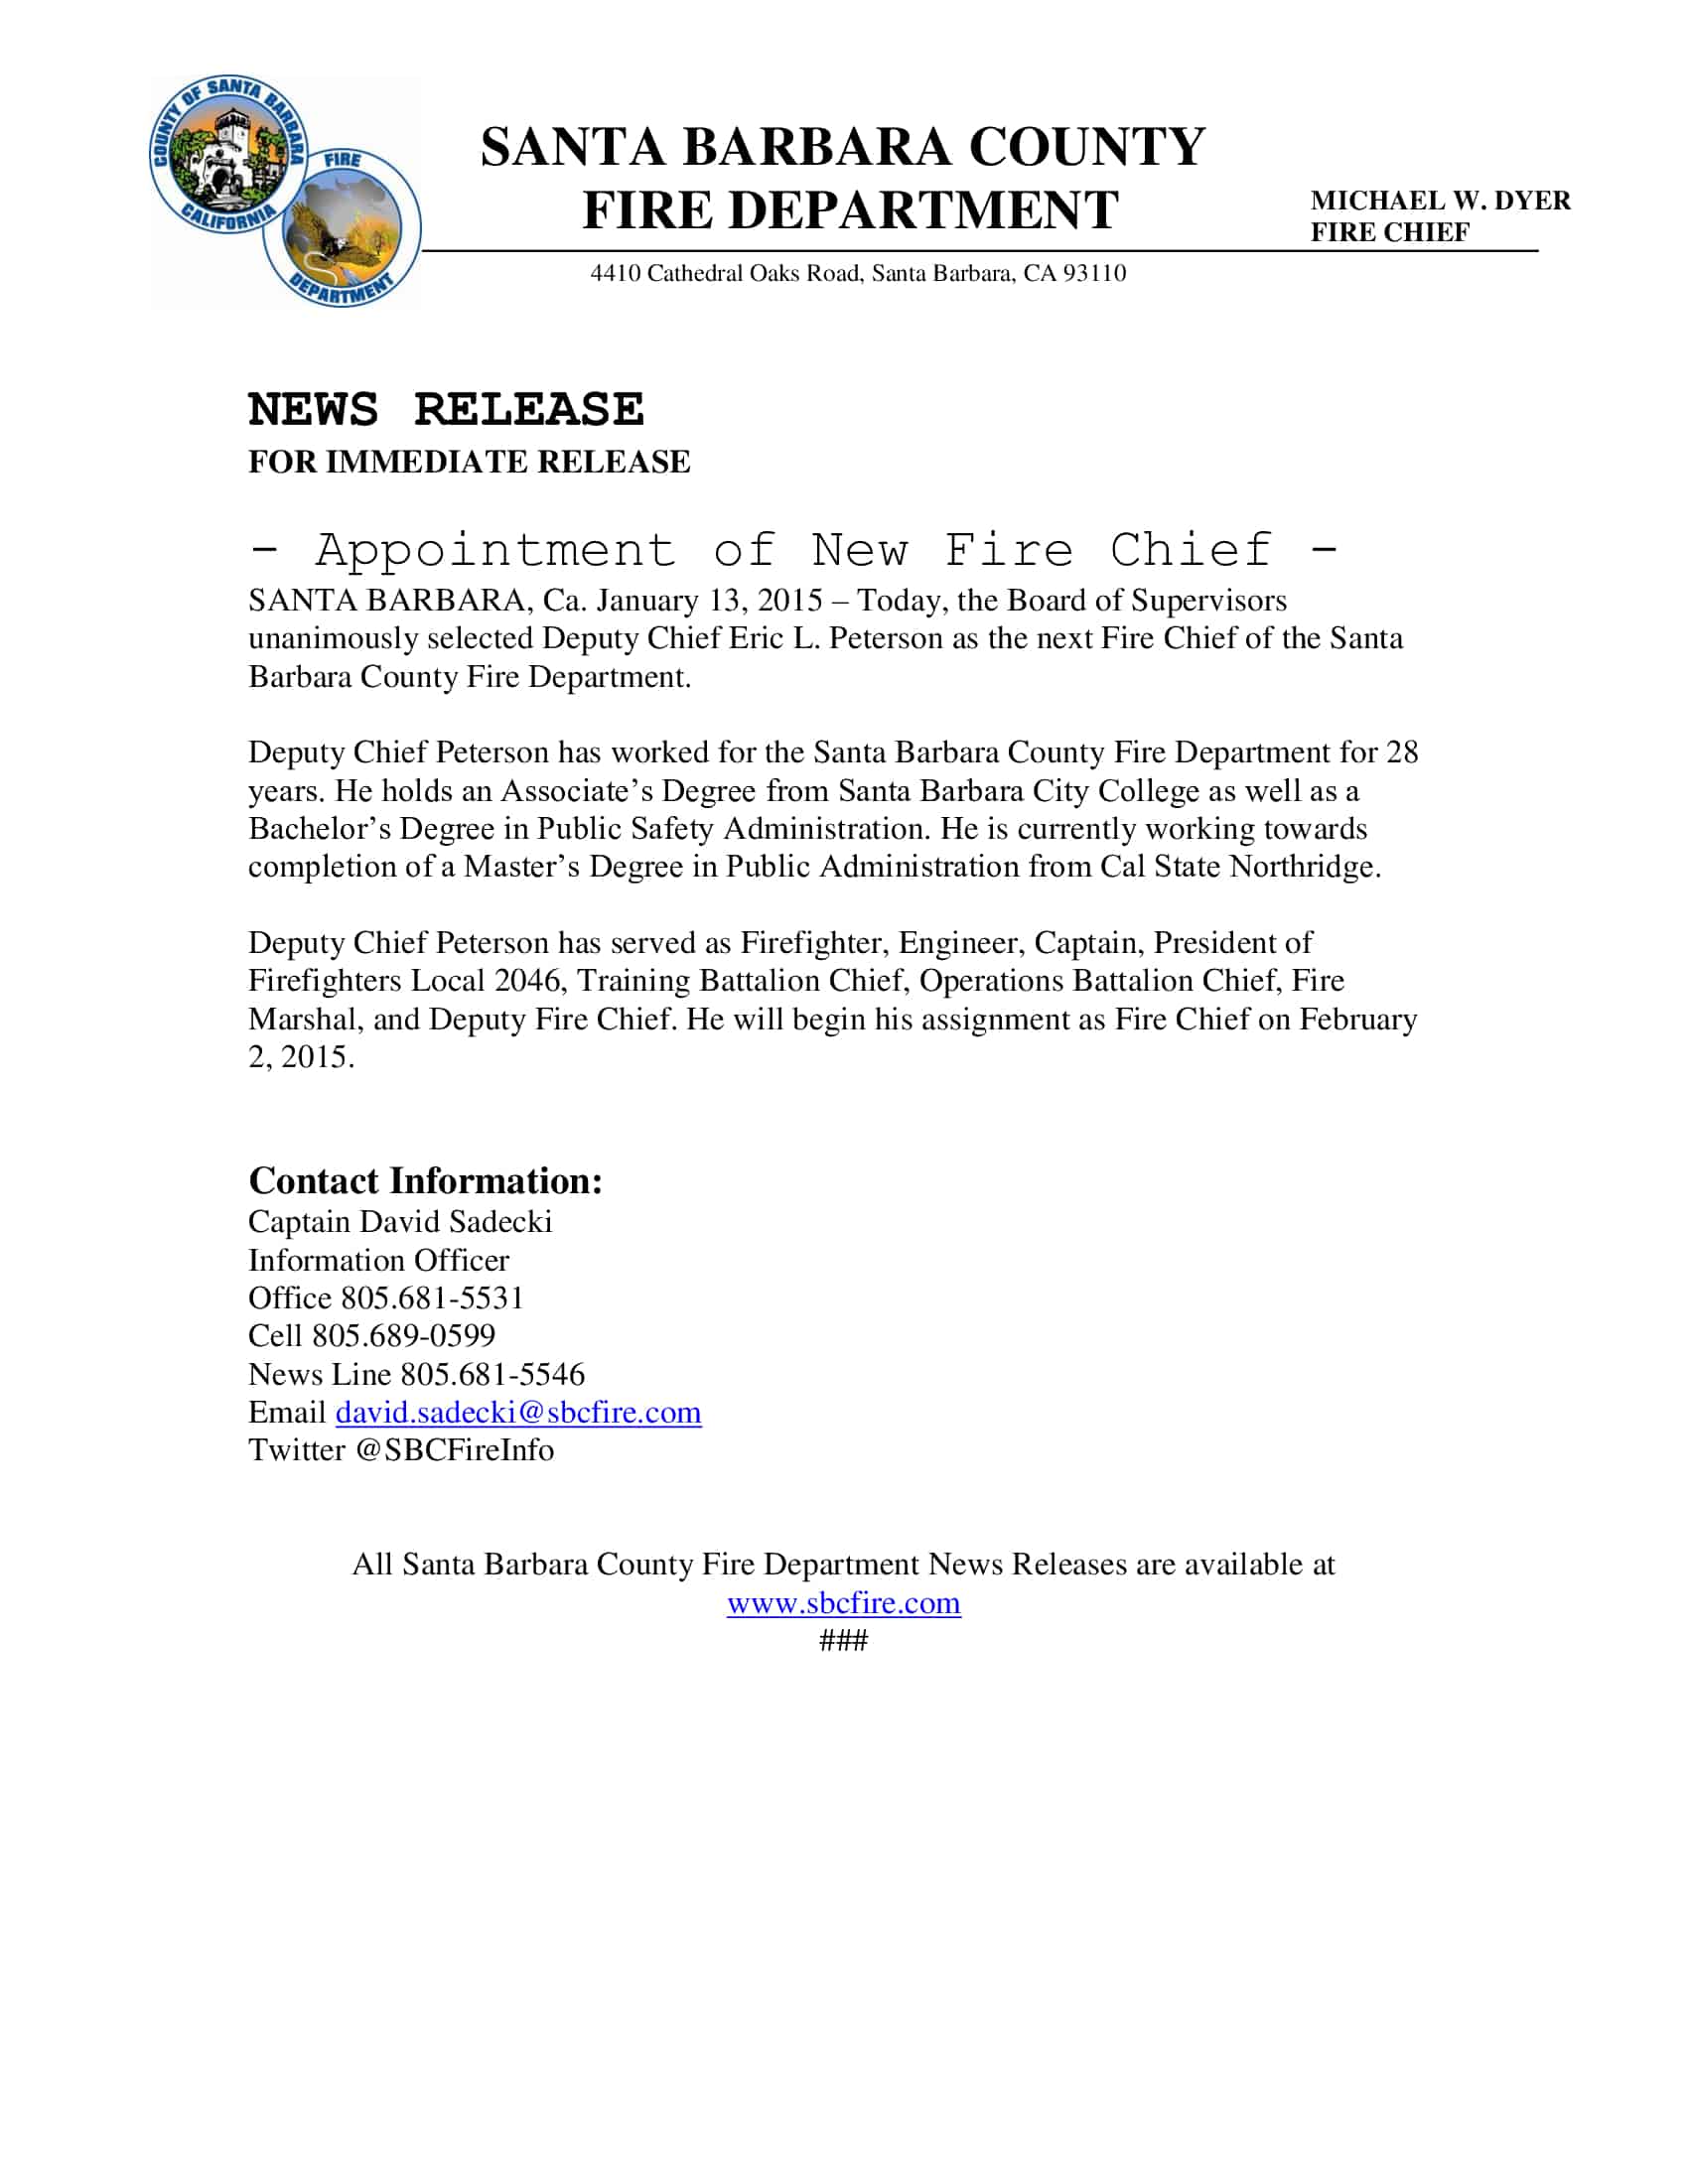 Appointment of New Fire Chief